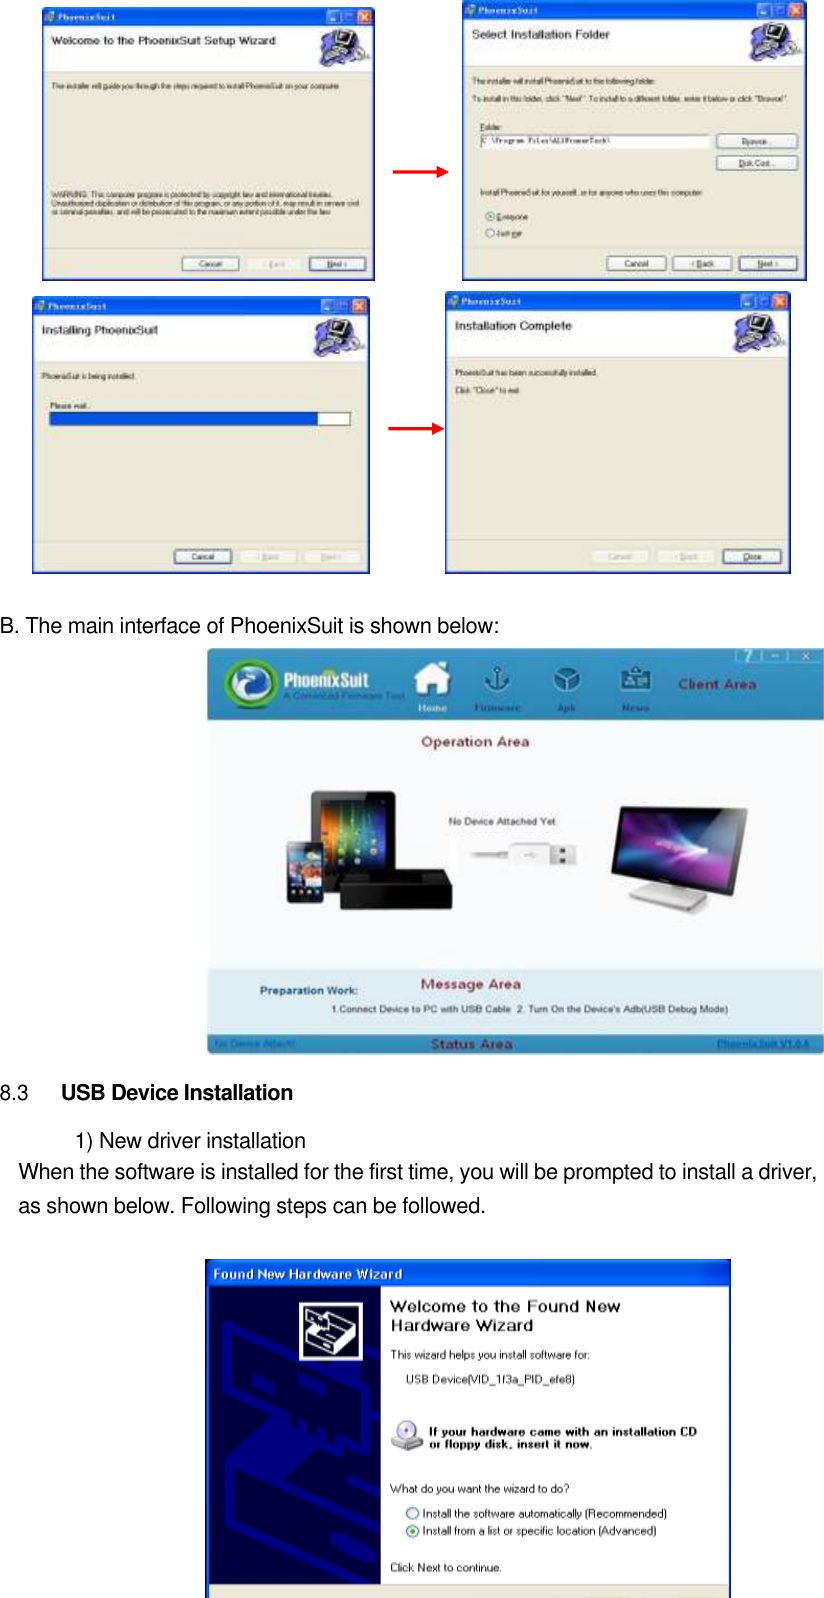                                 B. The main interface of PhoenixSuit is shown below:        8.3     USB Device Installation 1) New driver installation   When the software is installed for the first time, you will be prompted to install a driver, as shown below. Following steps can be followed.         